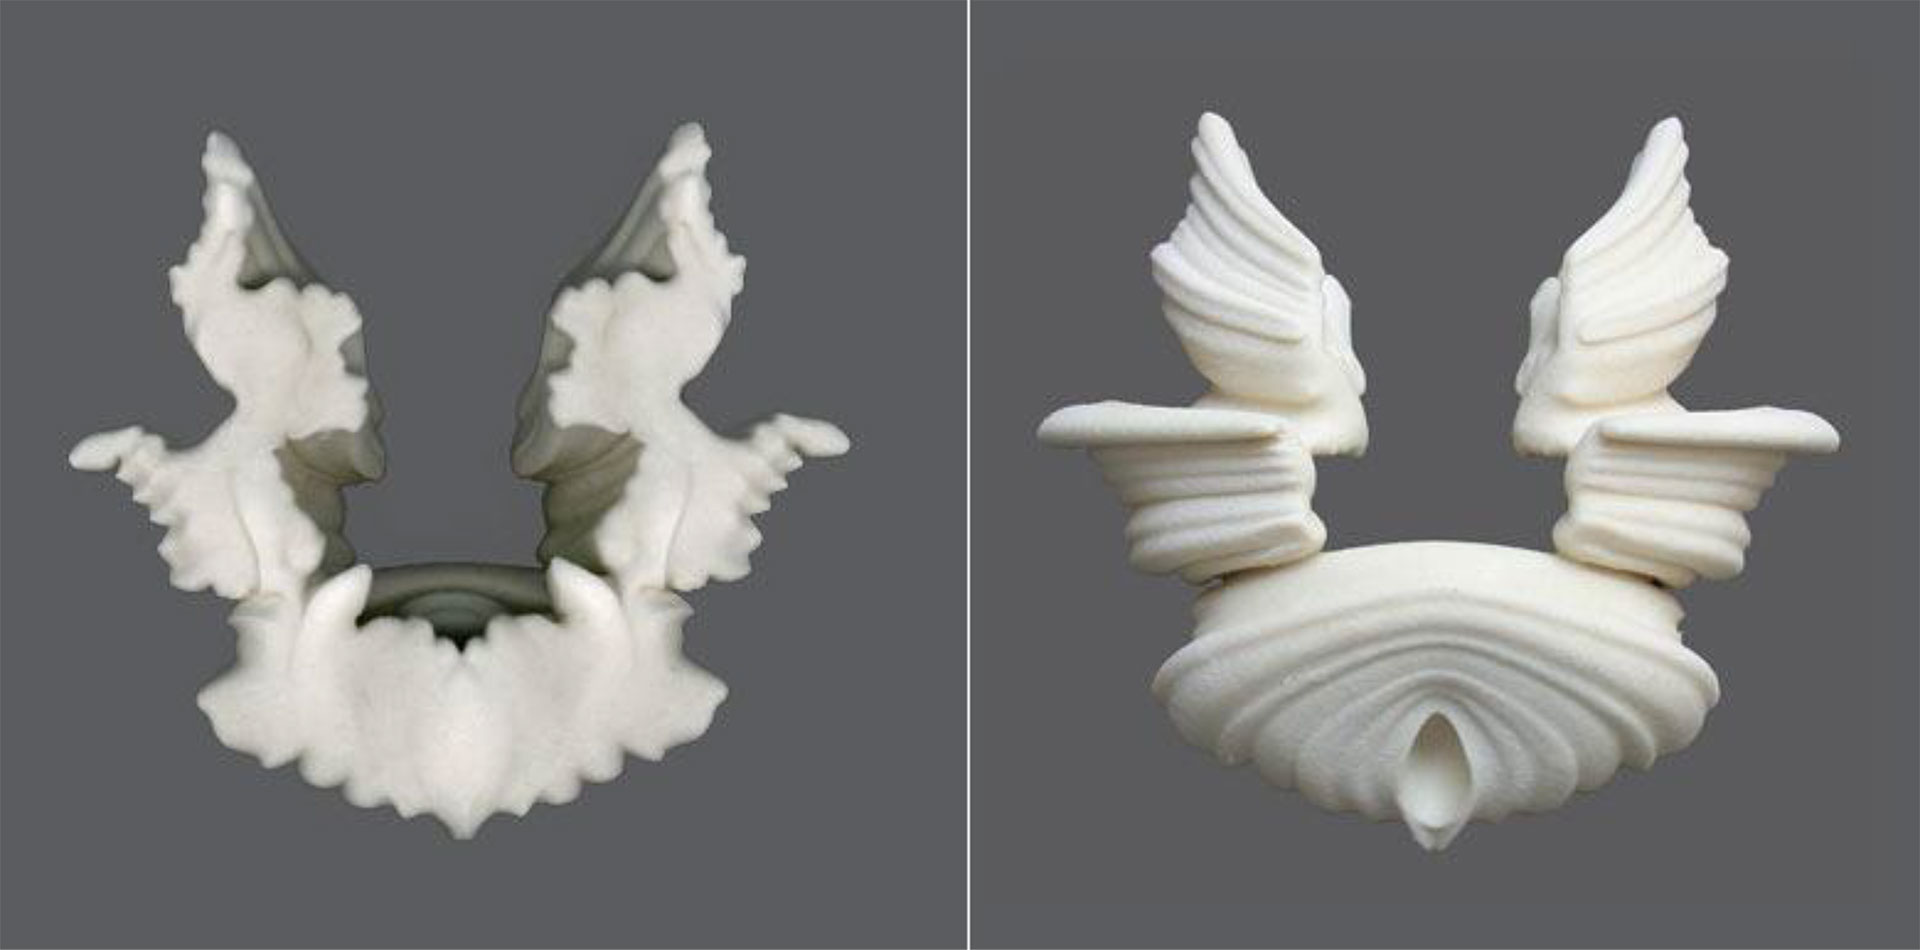 Suzanne Anker, Rorschach series (Rocker), 2004-05. Rapid Prototype Sculpture. Plaster and resin, Edition of 3. 9” x 9.5” x 2.5”. $3,000. Also available in 4.5” x 5” x 1”. Plaster and resin; ivory white or painted black, Edition of 6. $500.